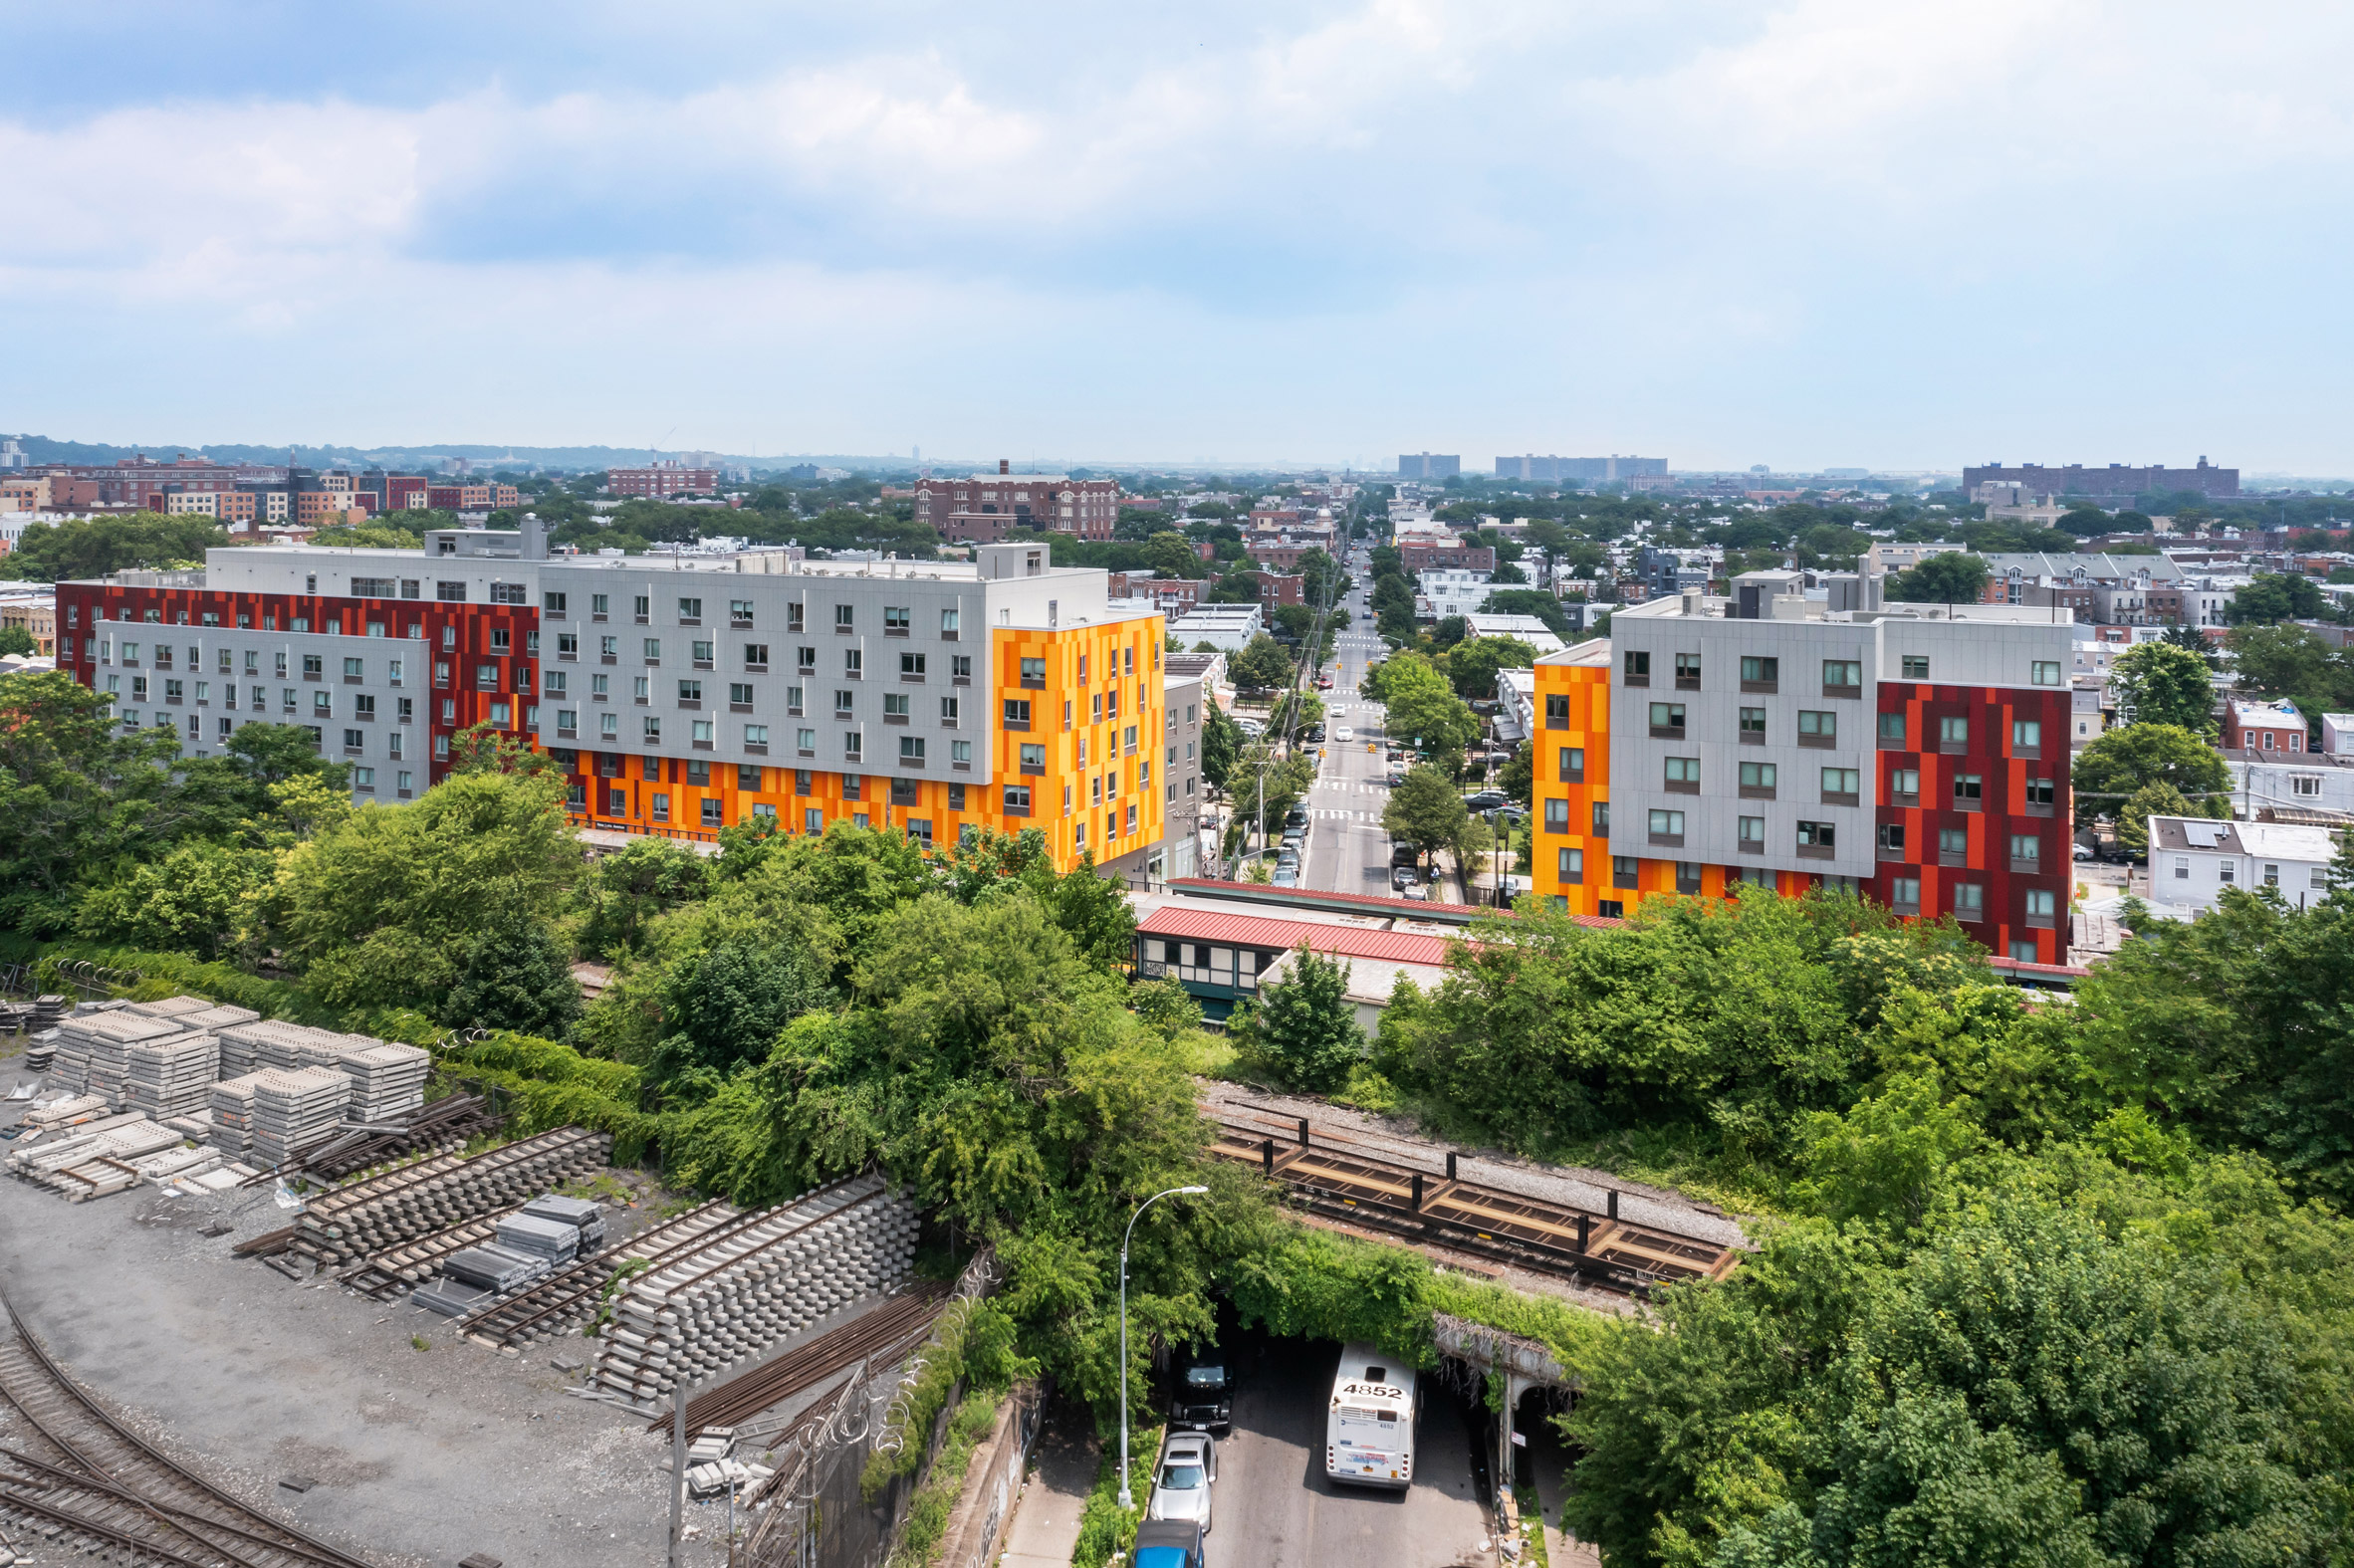 Colourful blocky affordable housing in Brooklyn, New York City